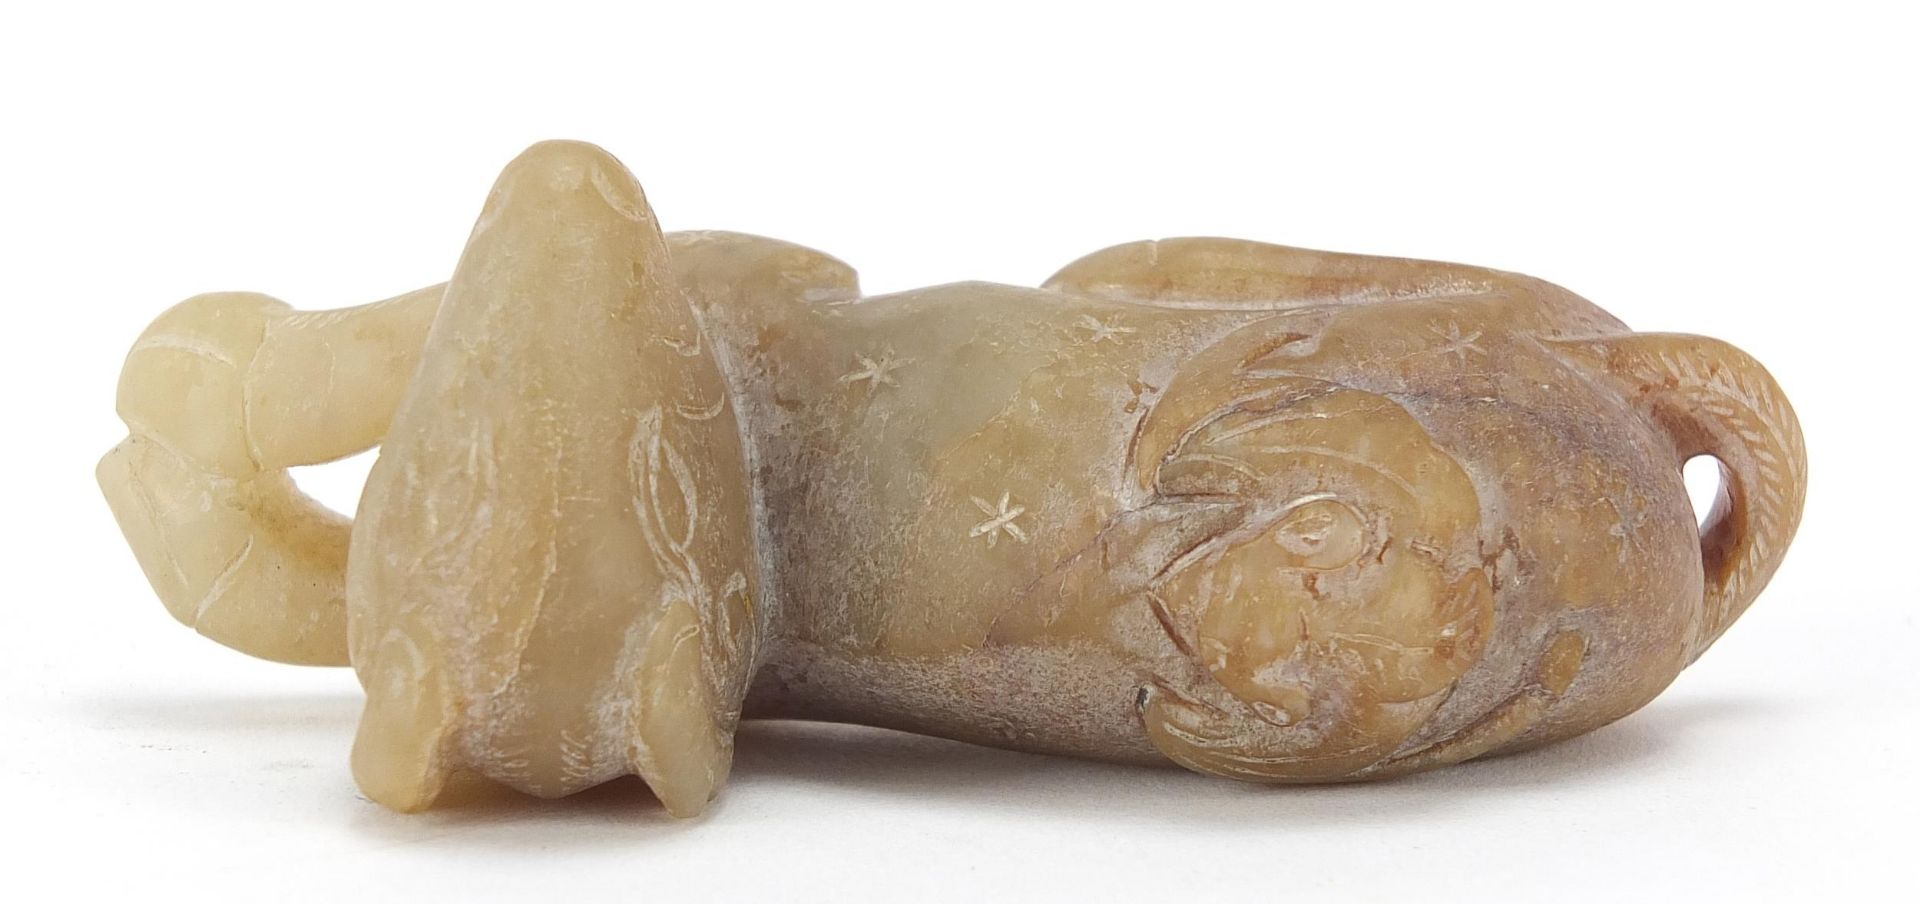 Good Chinese hardstone carving of a recumbent horse and bat, possibly jade, 8.5cm in length - Image 7 of 7